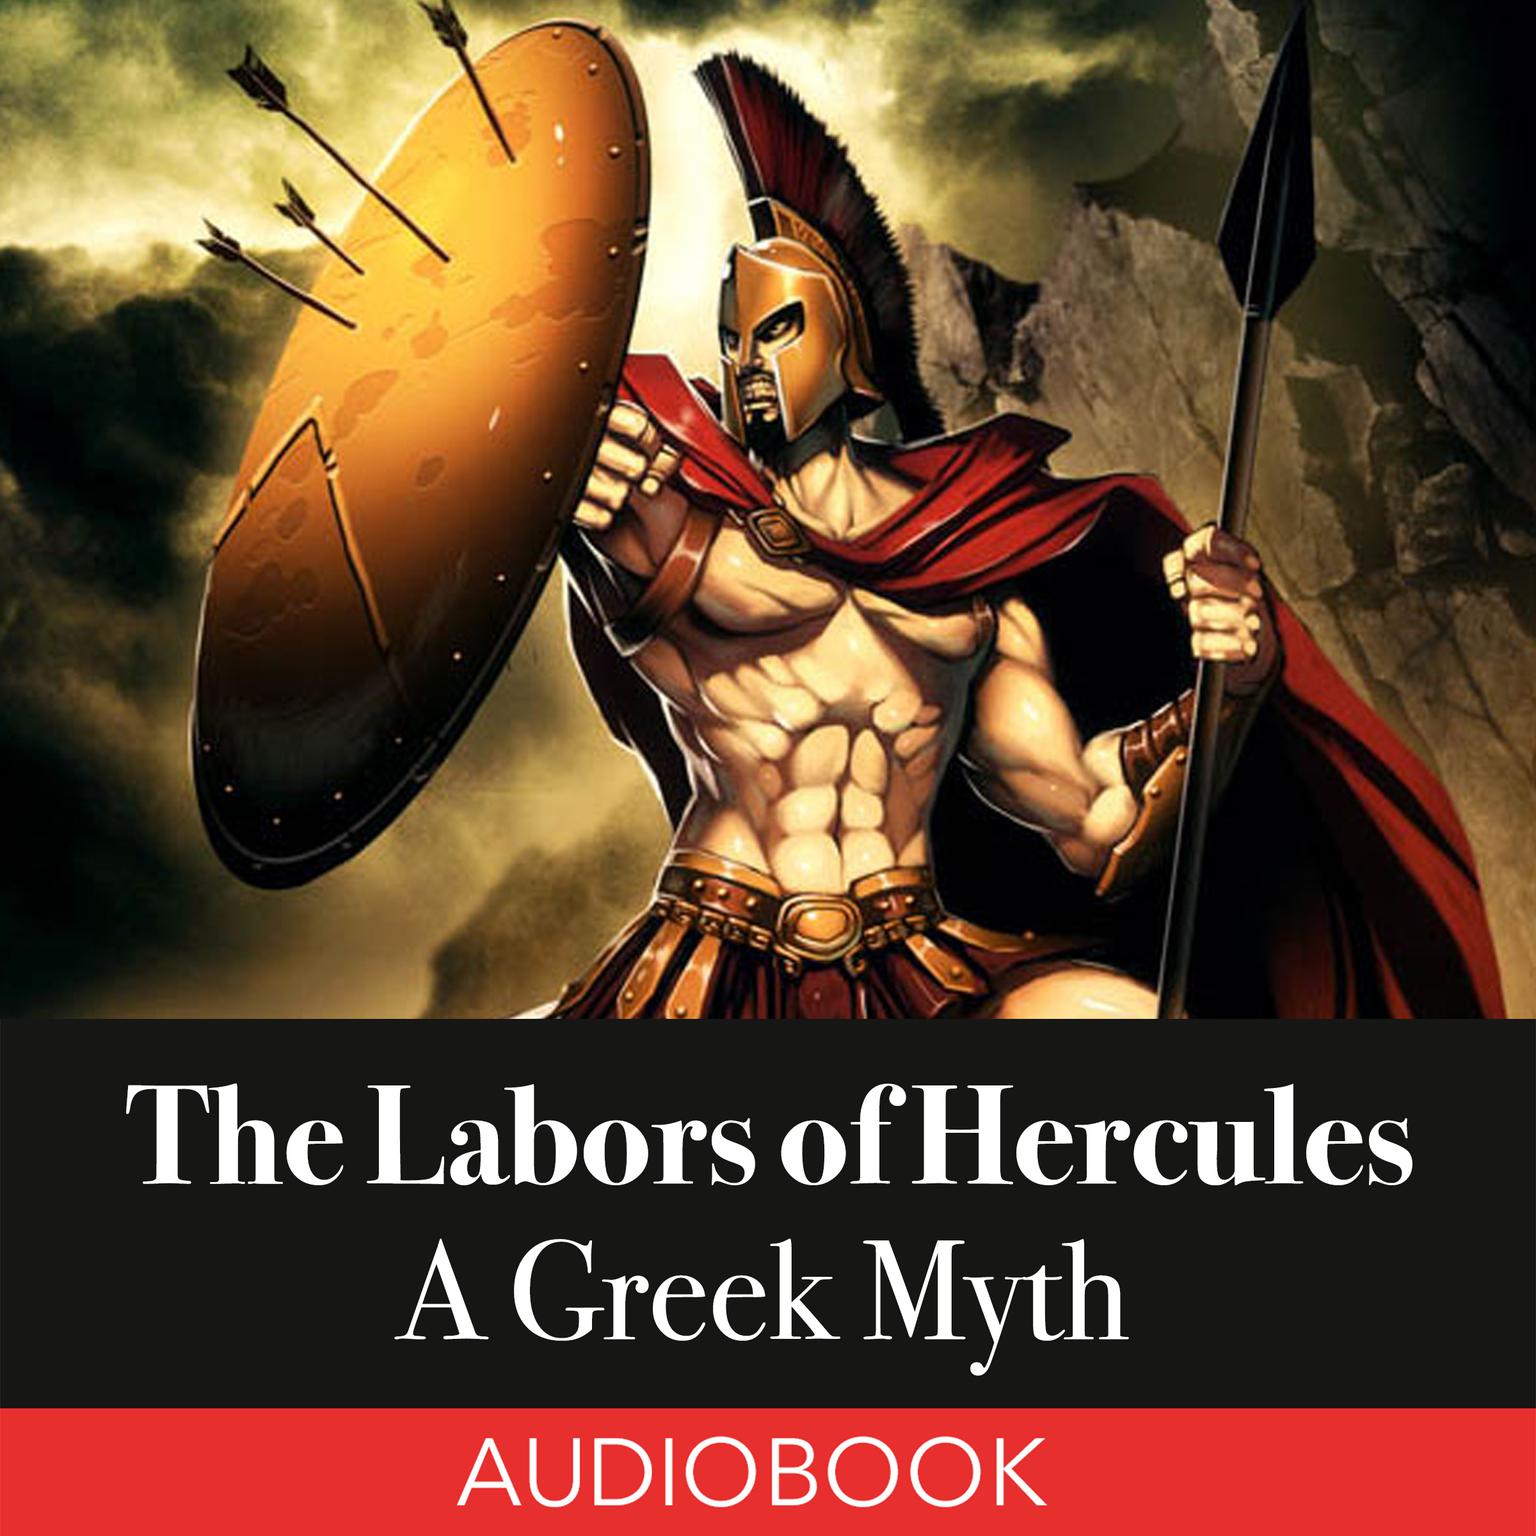 The Labors of Hercules: A Greek Myth (Abridged) Audiobook, by unknown